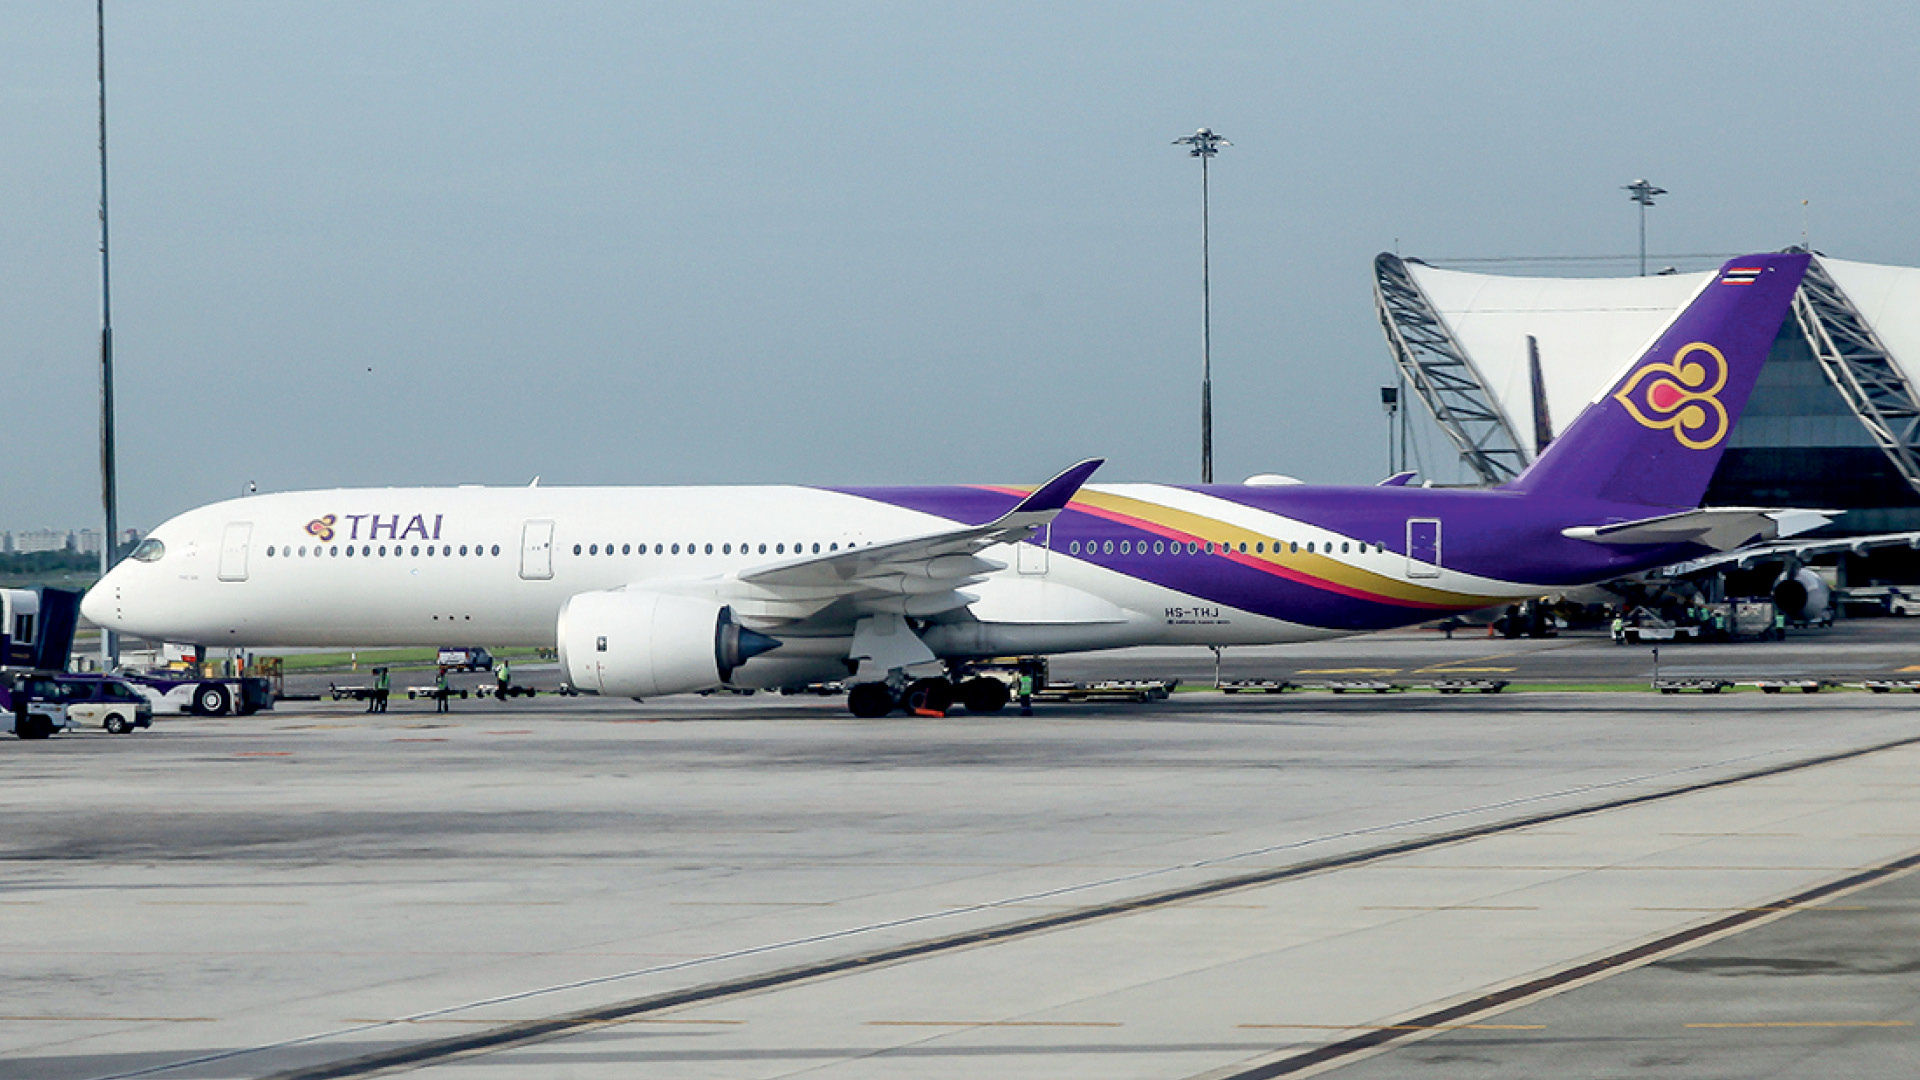 Here's What We're Loving About The New Thai Airways Update